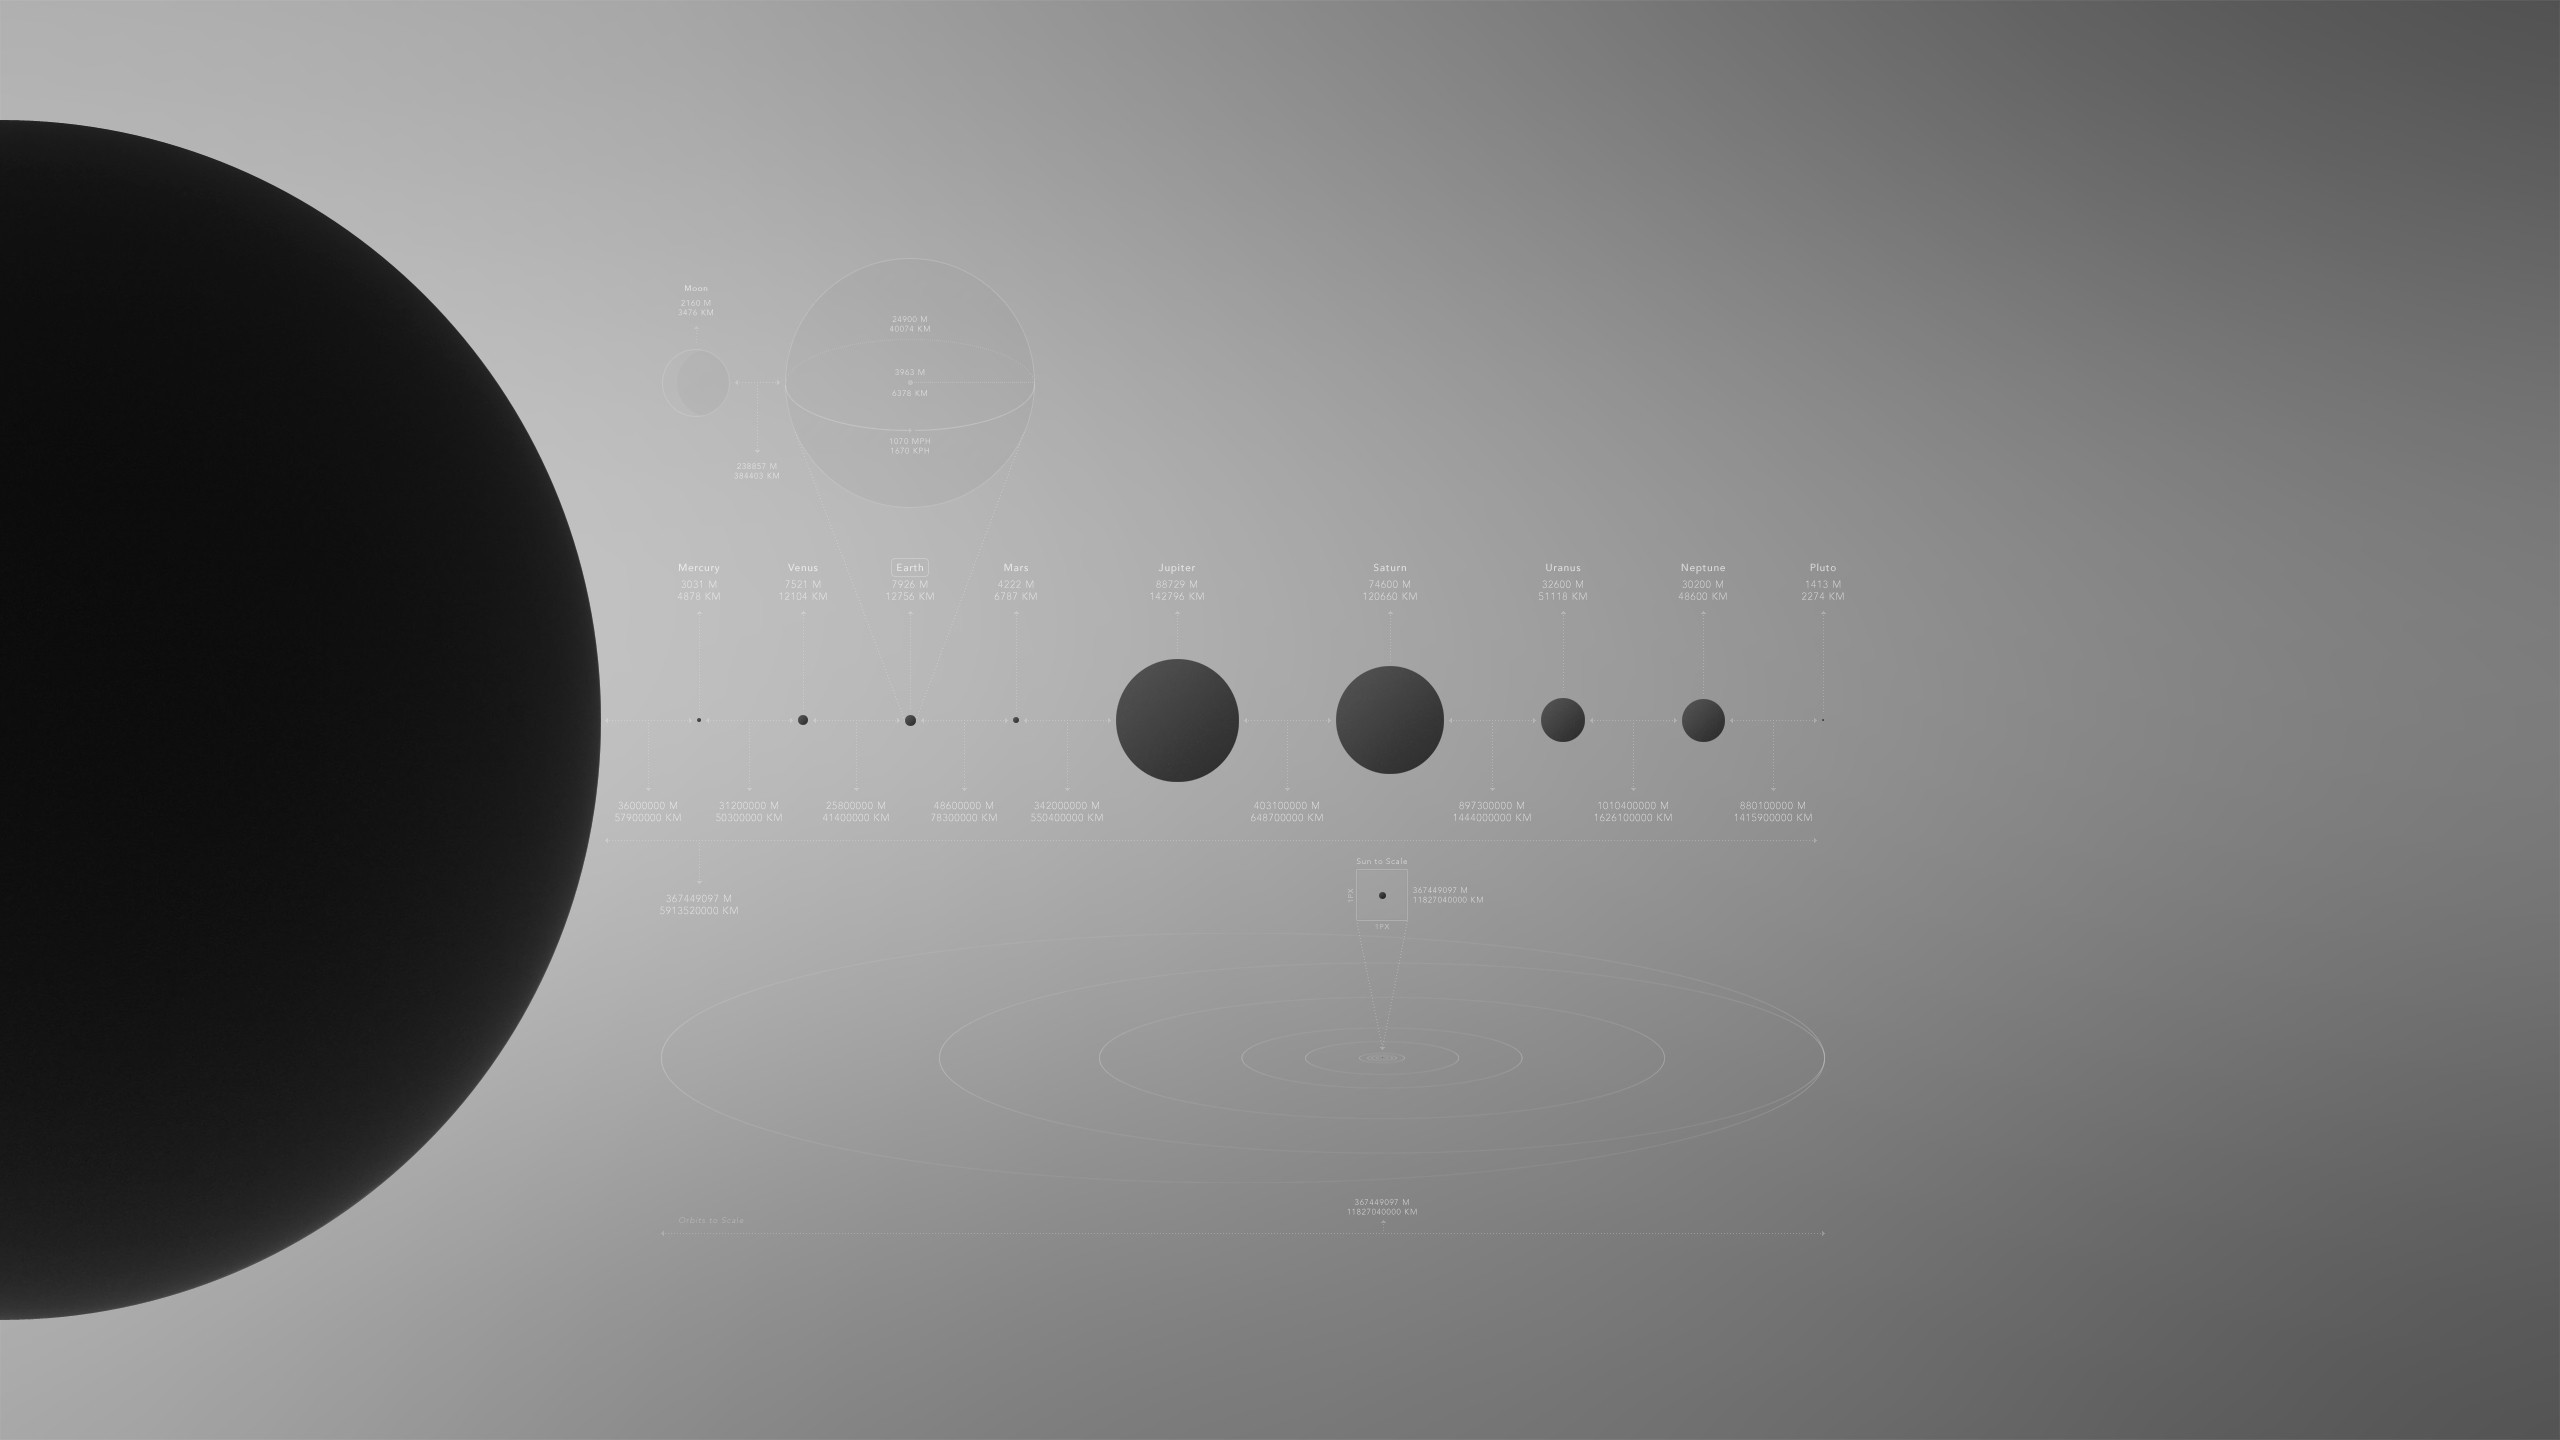 General 2560x1440 planet space Solar System infographics monochrome science space art information